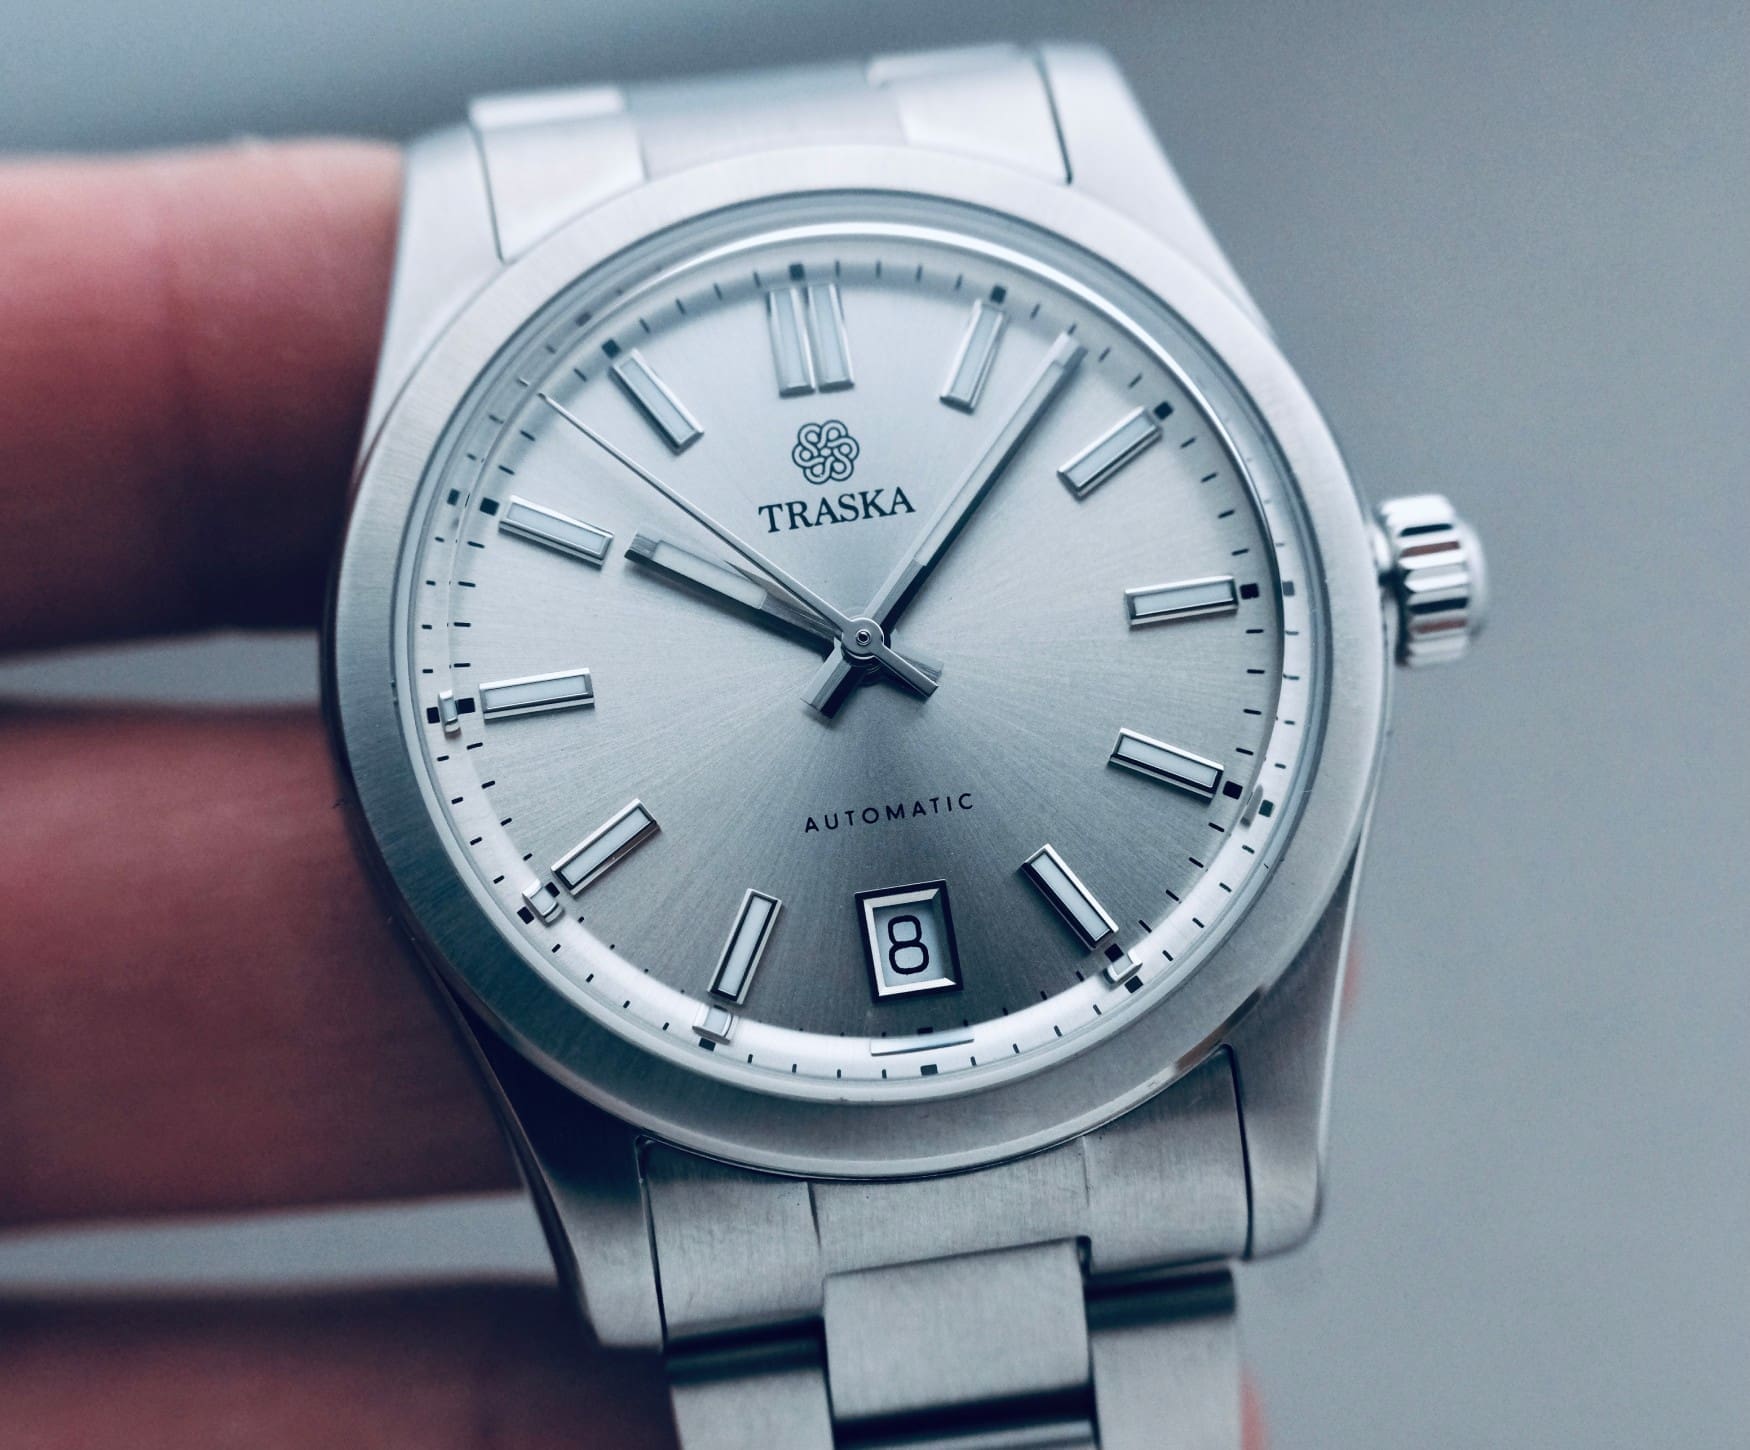 All You Need to Know About Traska Watches - The Watch Company